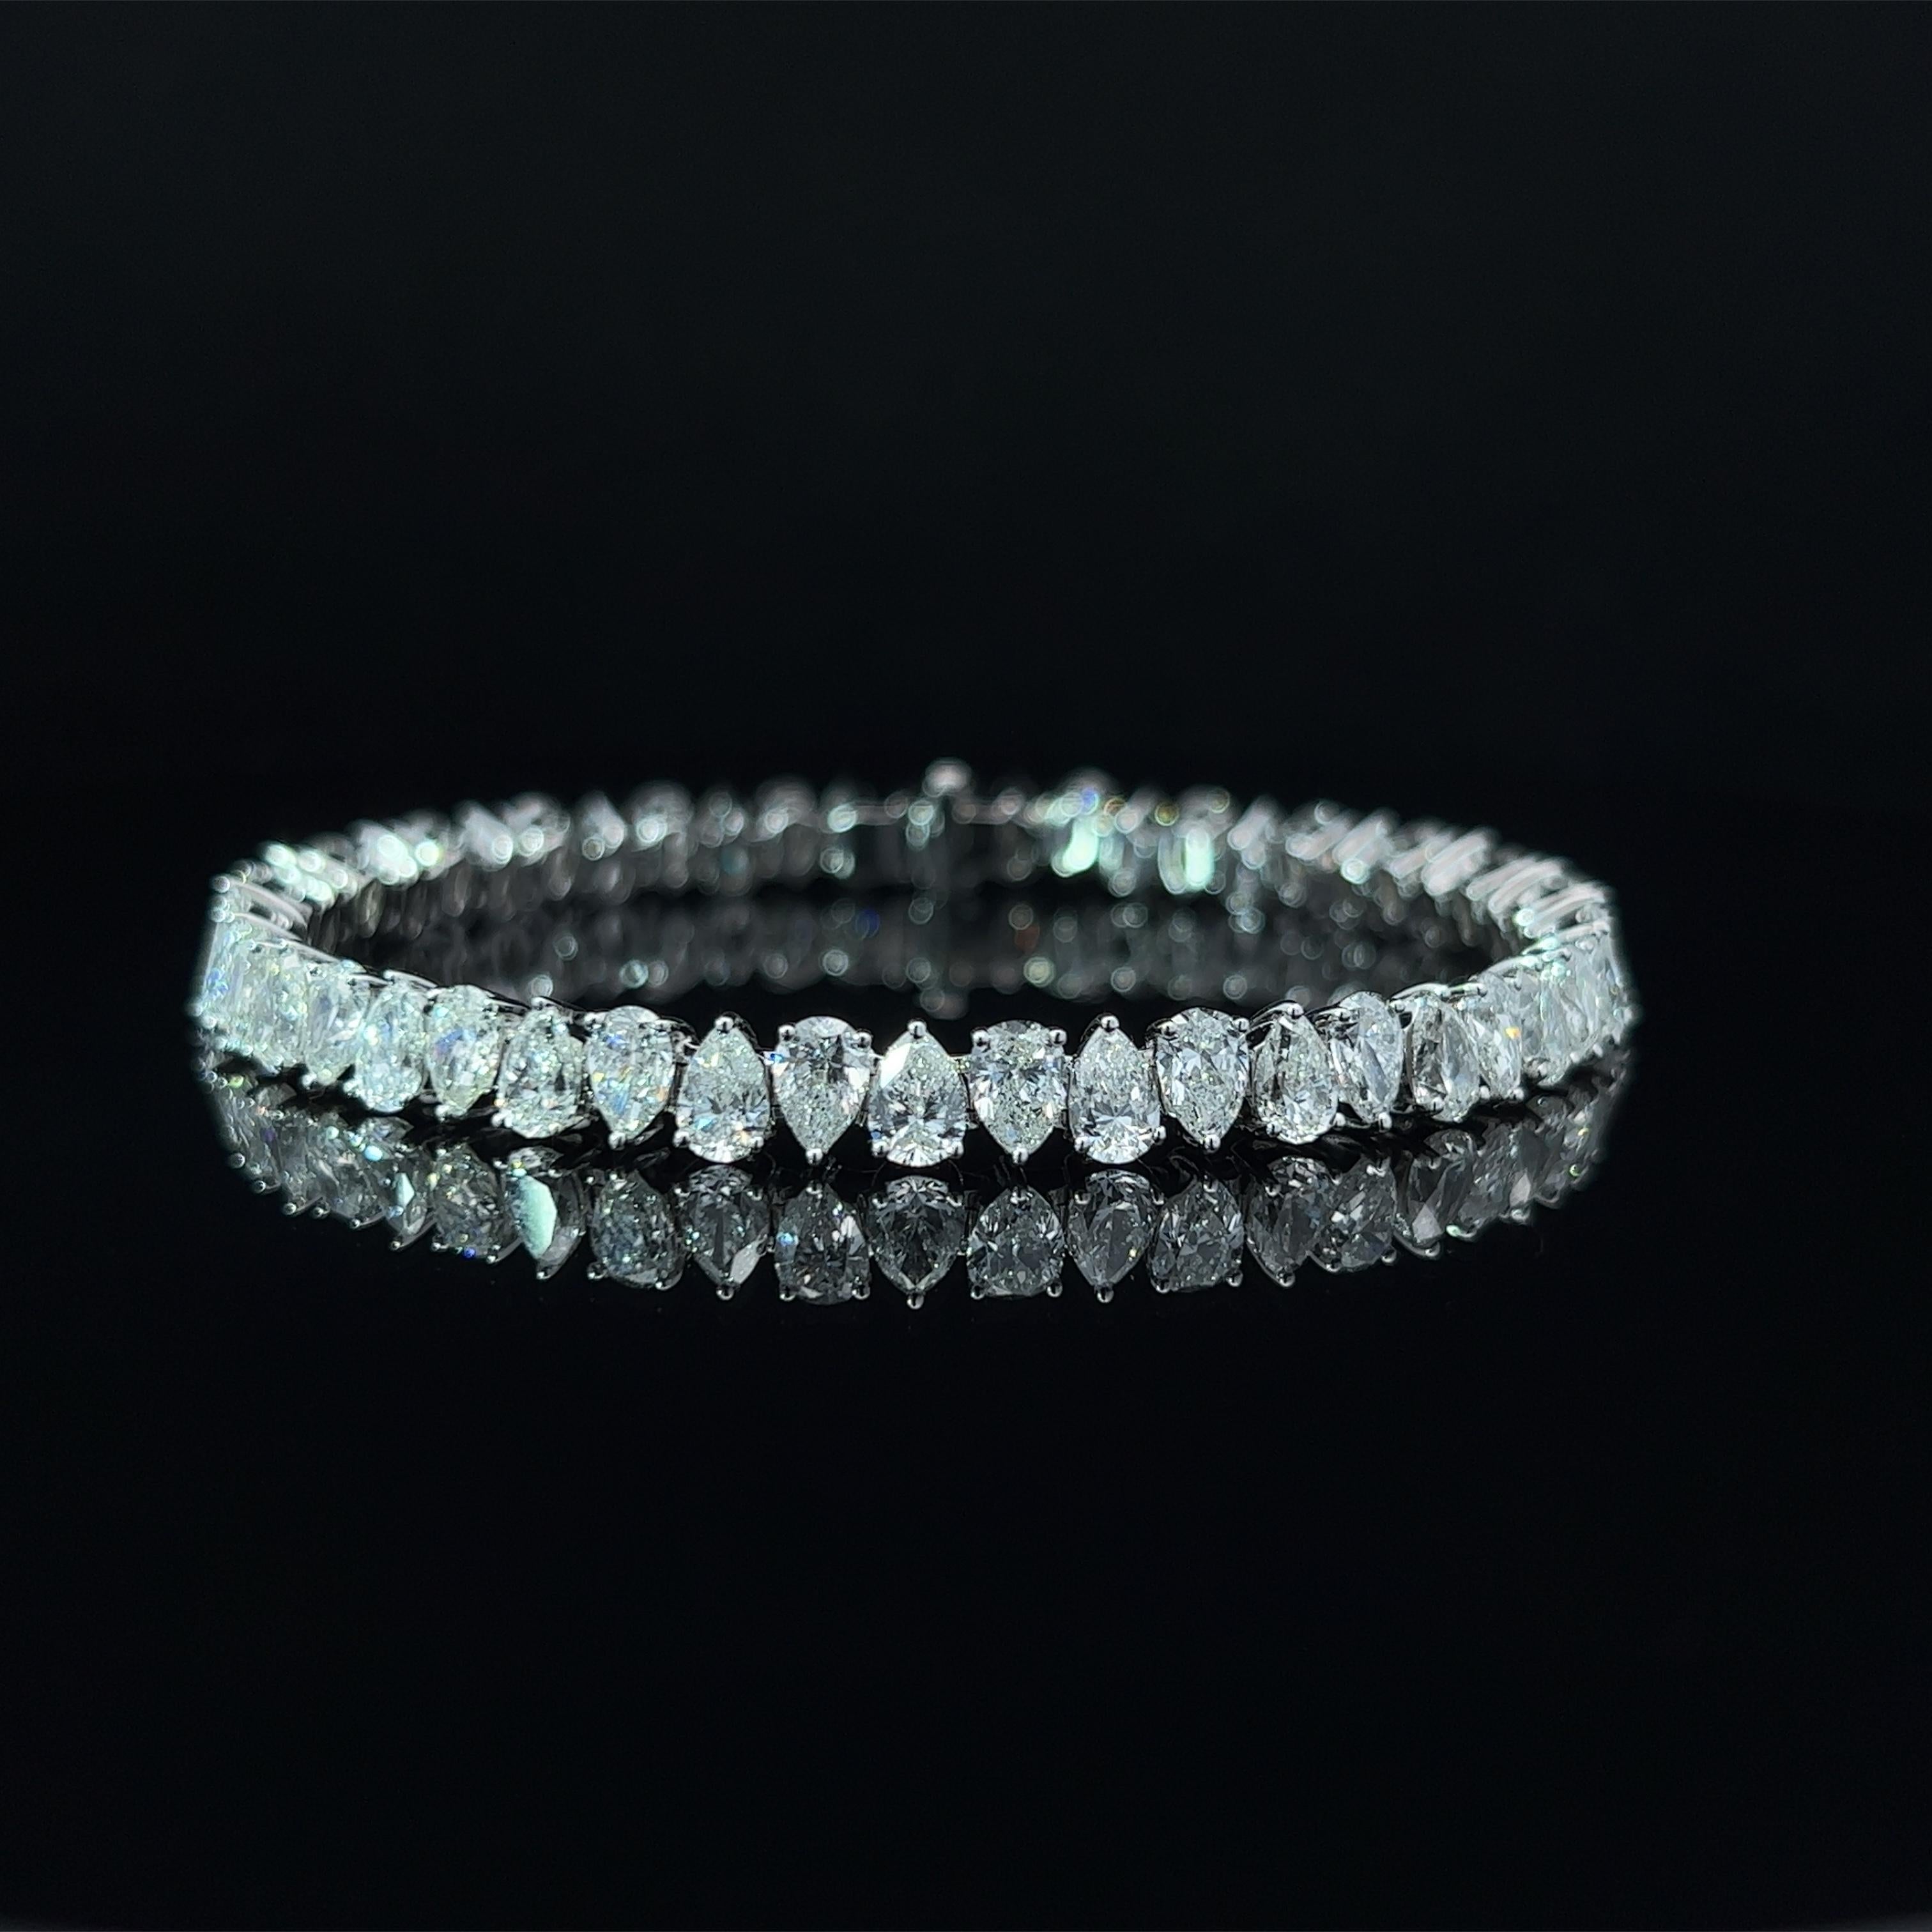 Diamond Shape: Pear Cut 
Total Diamond Weight: 15.21ct
Individual Diamond Weight: .33ct
Color/Clarity: GH VS  
Metal: 18K White Gold  
Metal Weight: 18.46g 

Key Features:

Pear-Cut Diamonds: The centerpiece of this bracelet features a dazzling